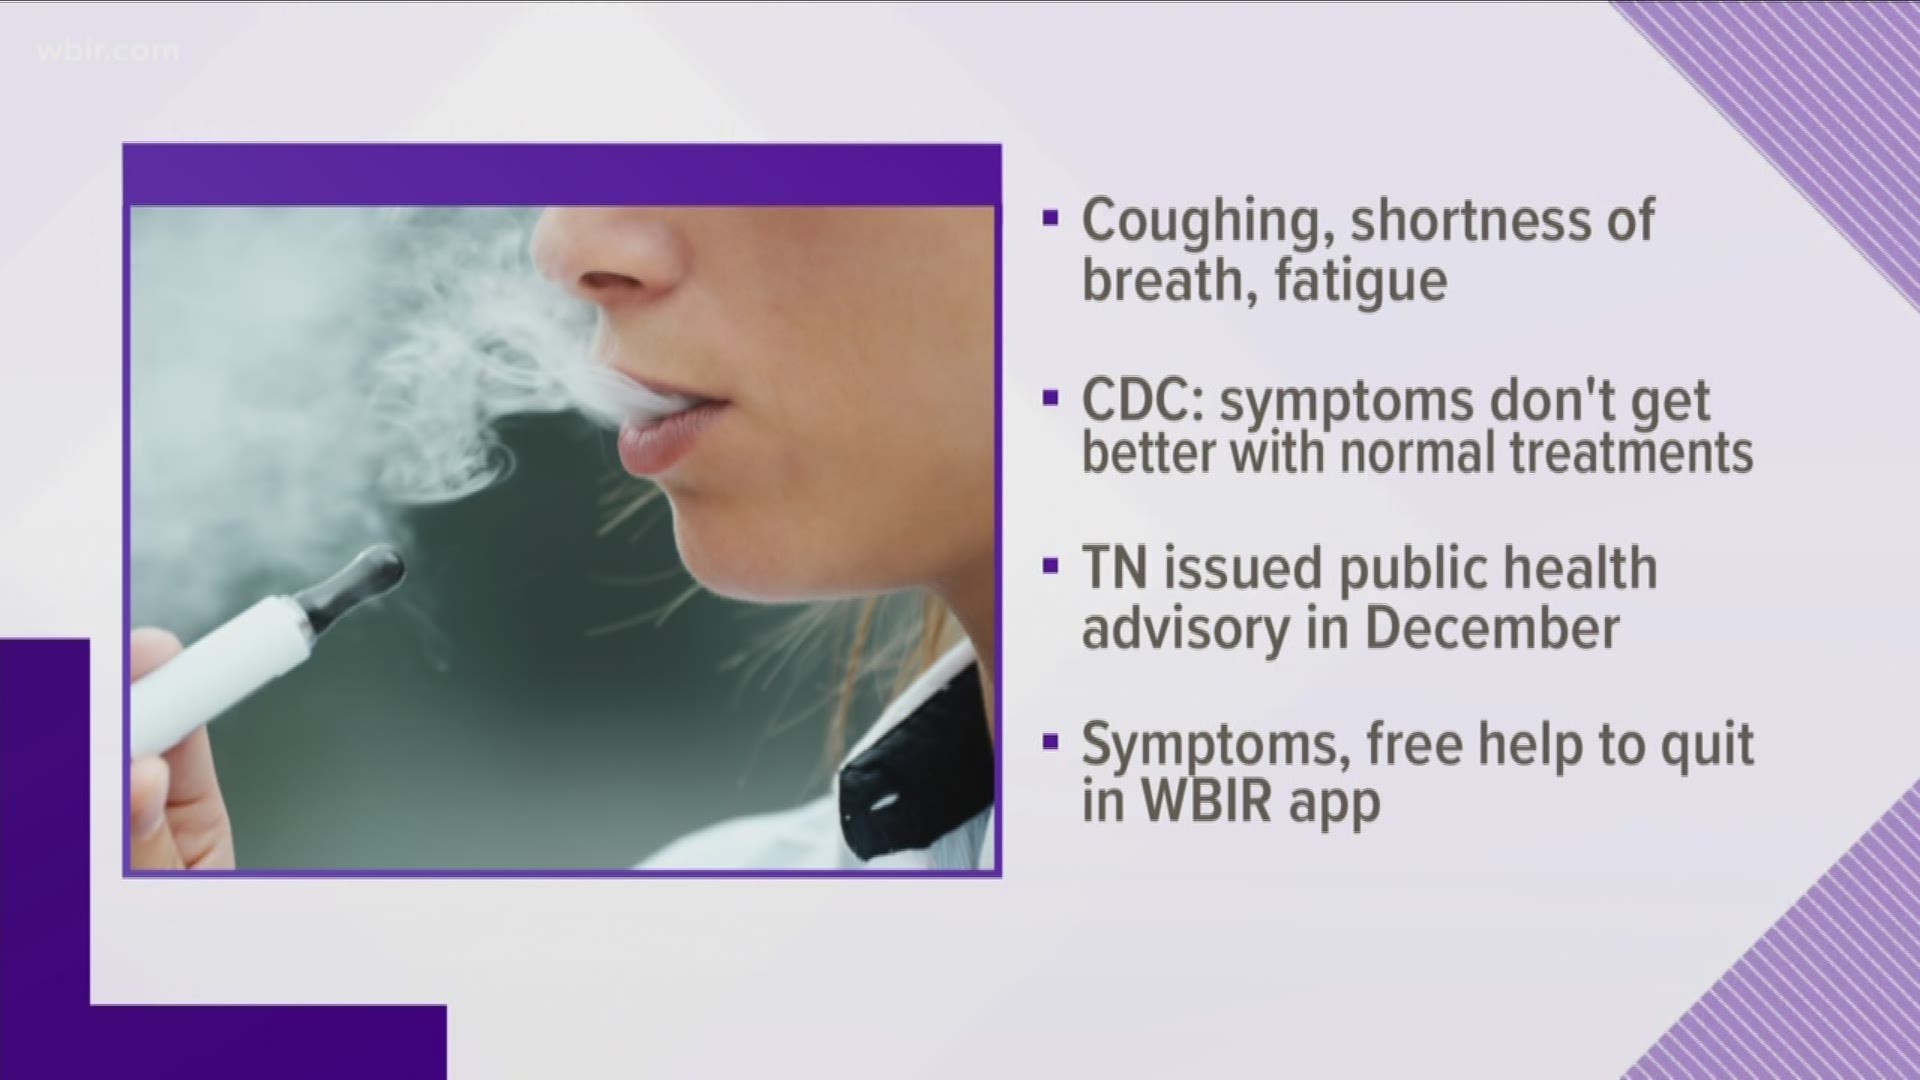 State health officials are asking doctors to report any cases of suspected respiratory illness linked to vaping.